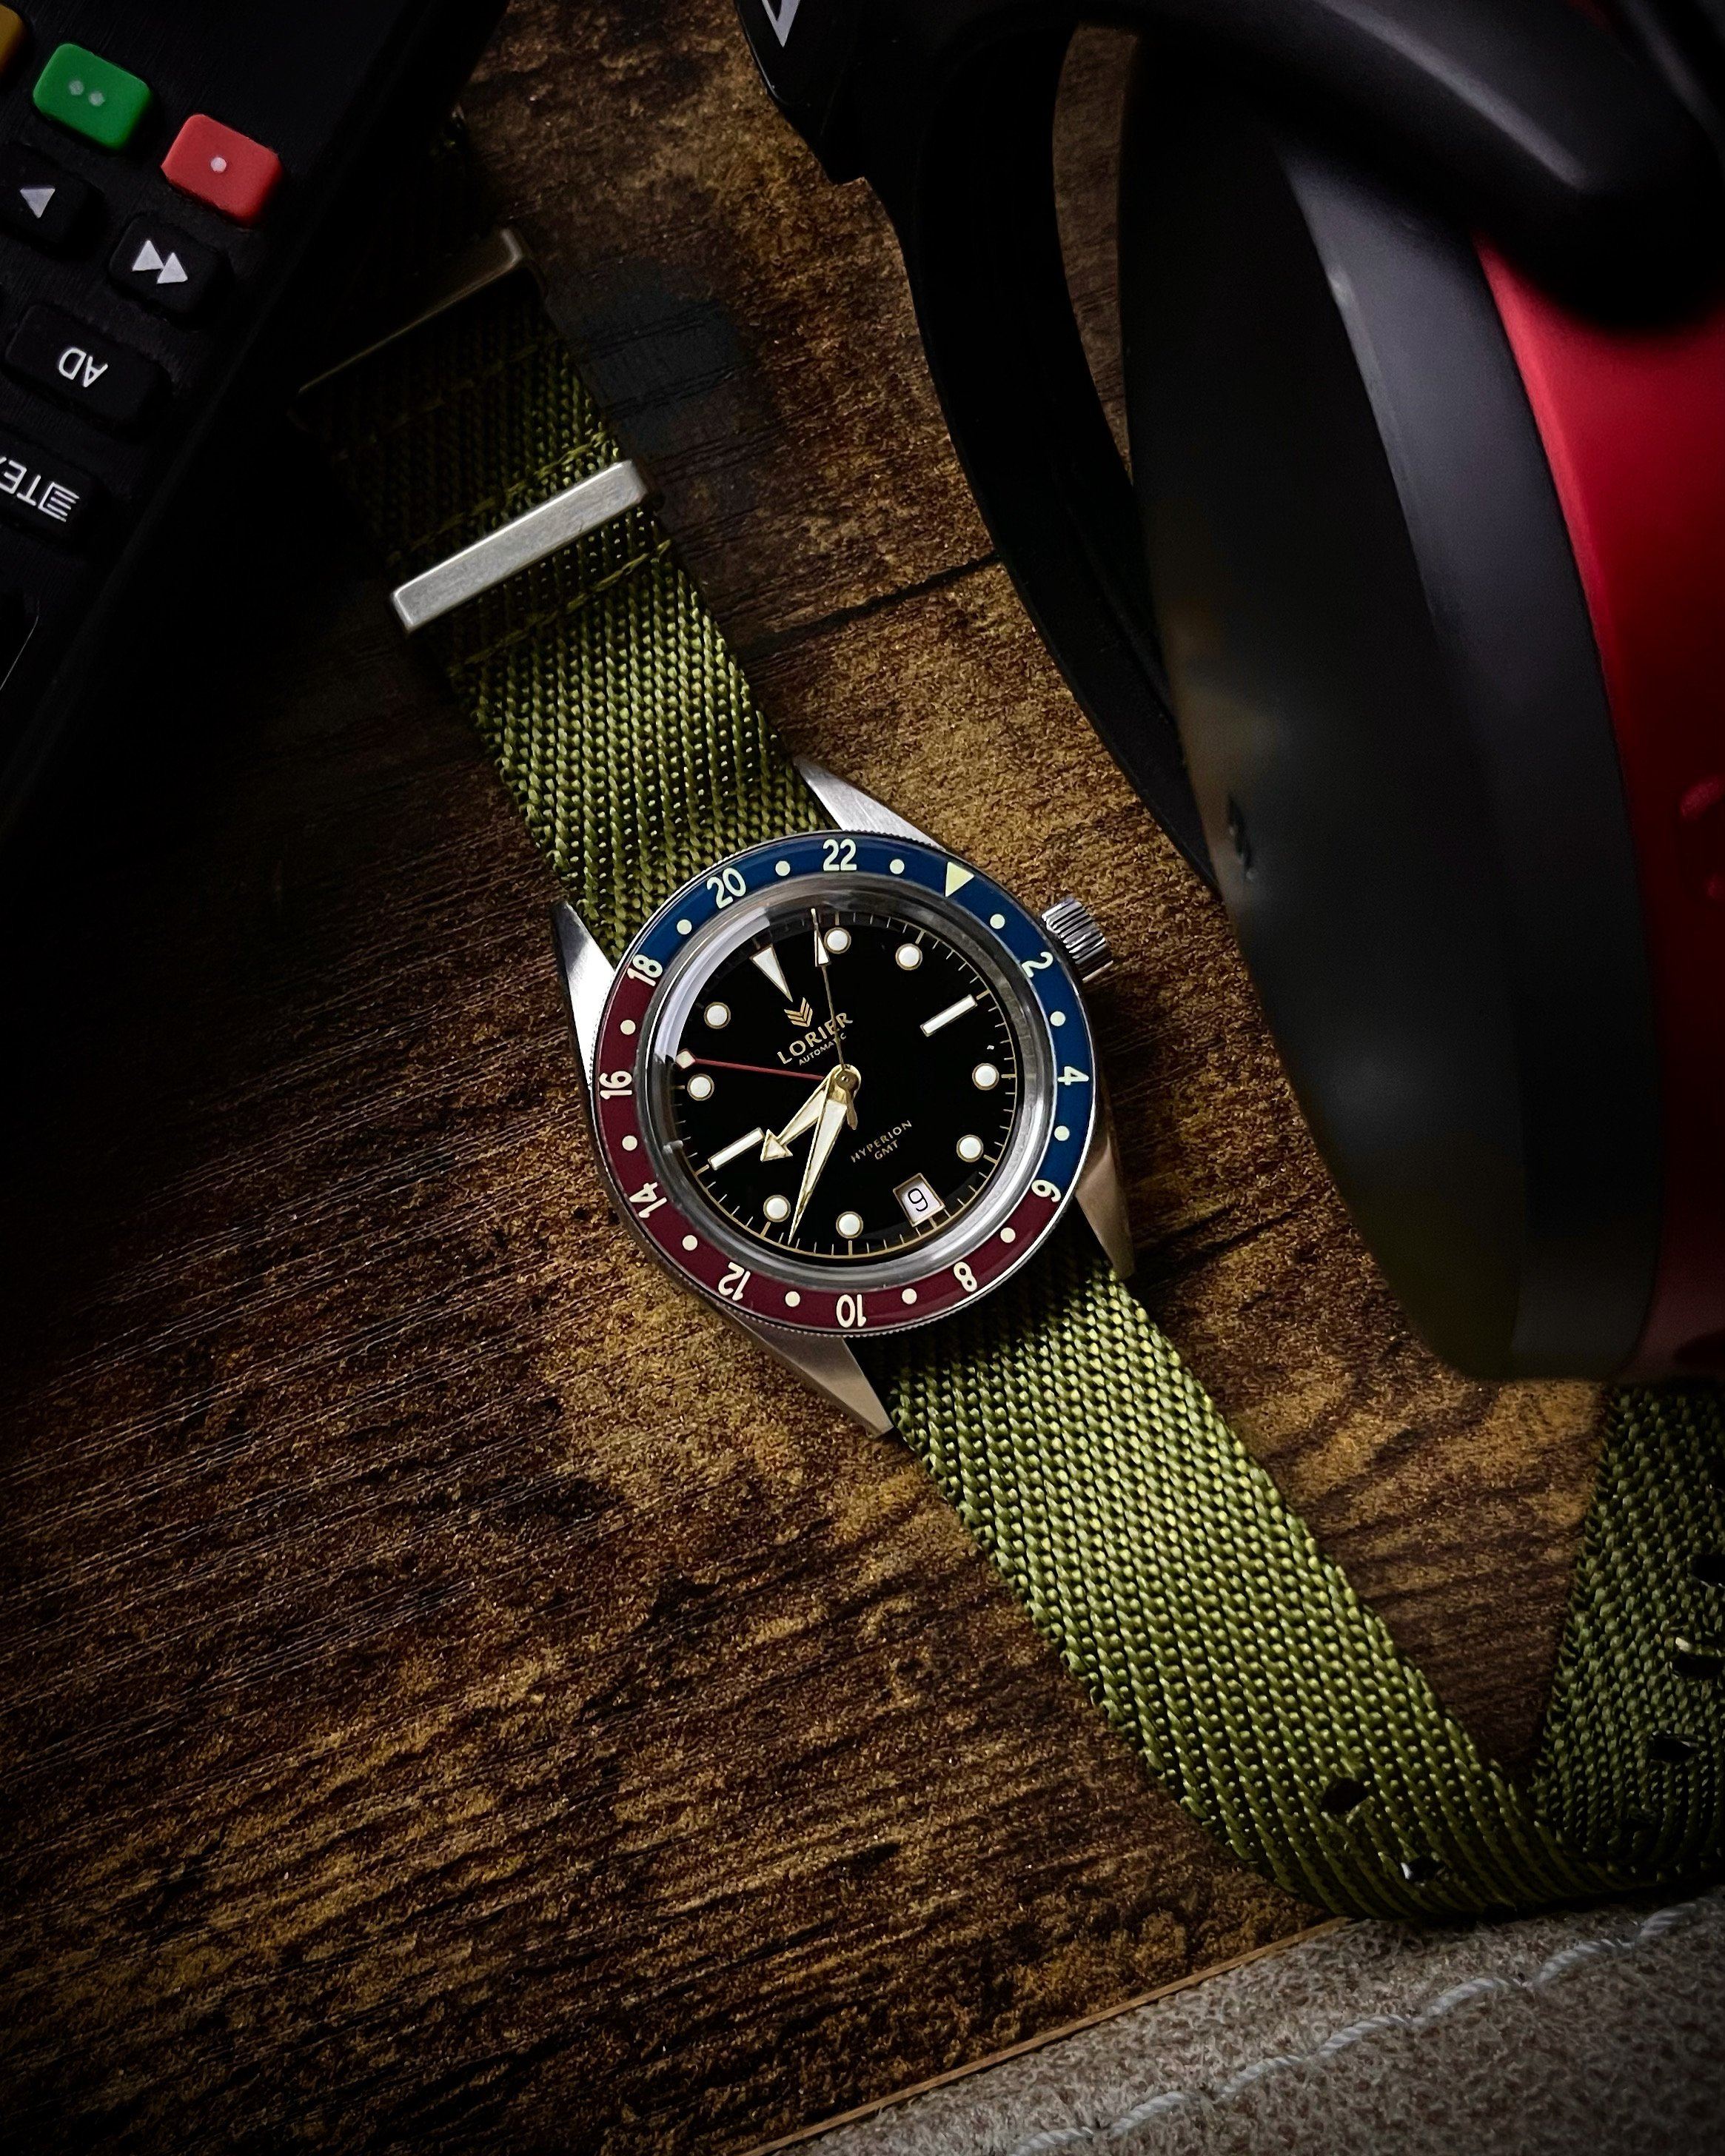 Lorier Hyperion -The Black Bay GMT we have been waiting for? I VARIO